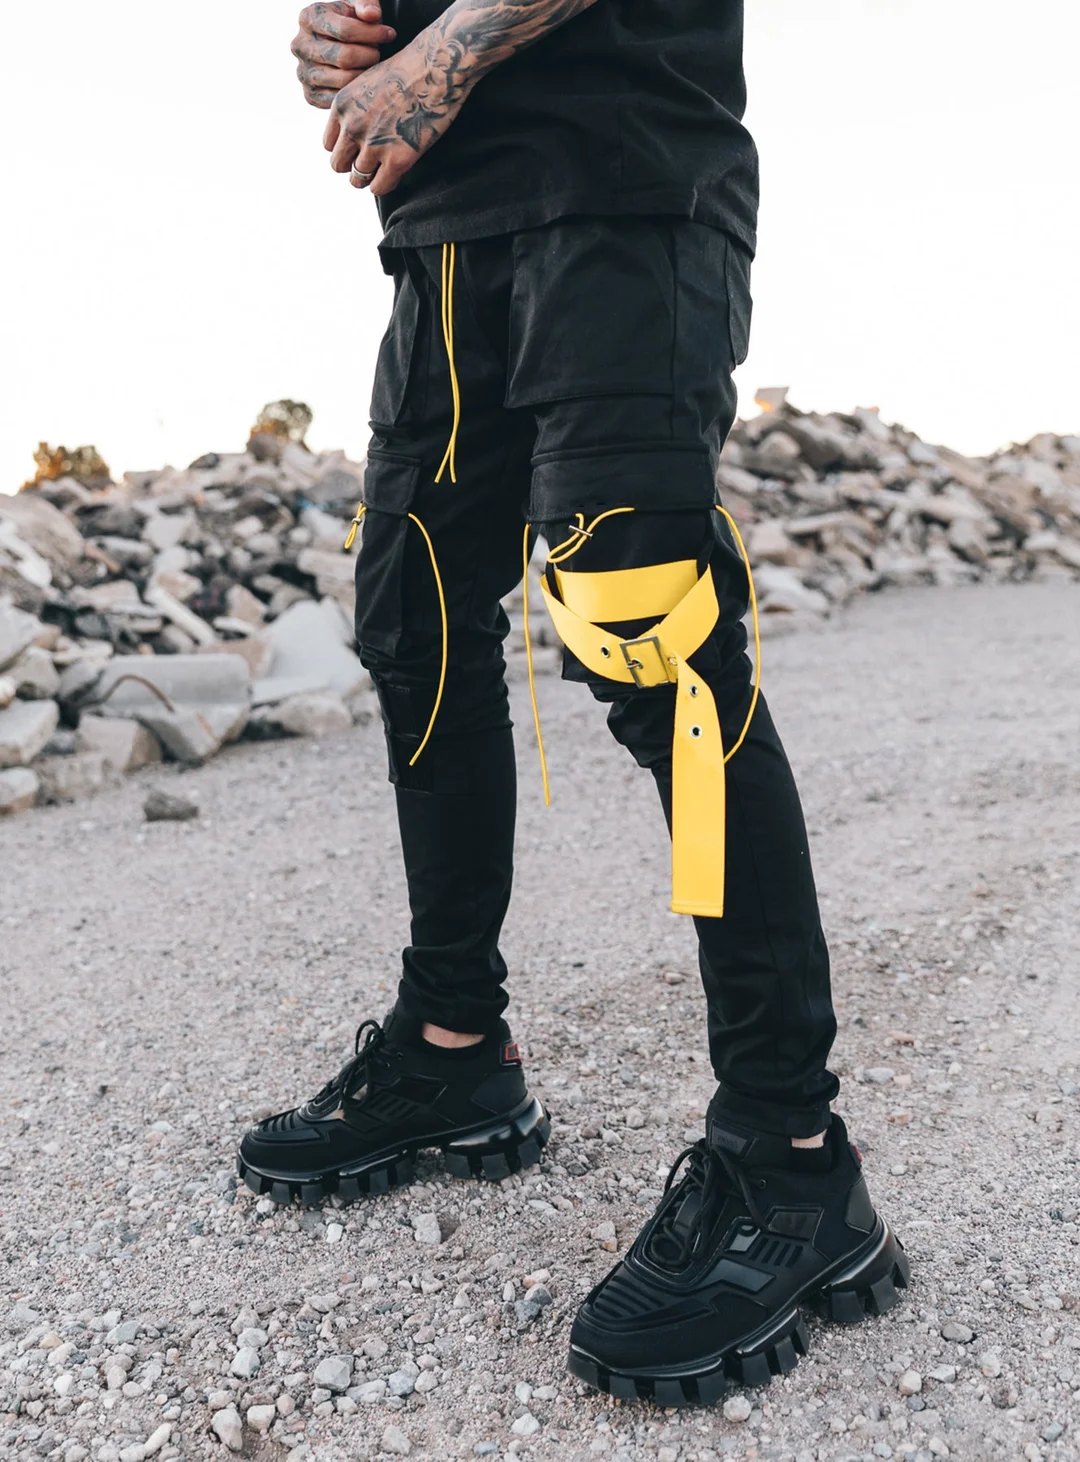 Revolution Cargo Pants V3 in Black and Yellow